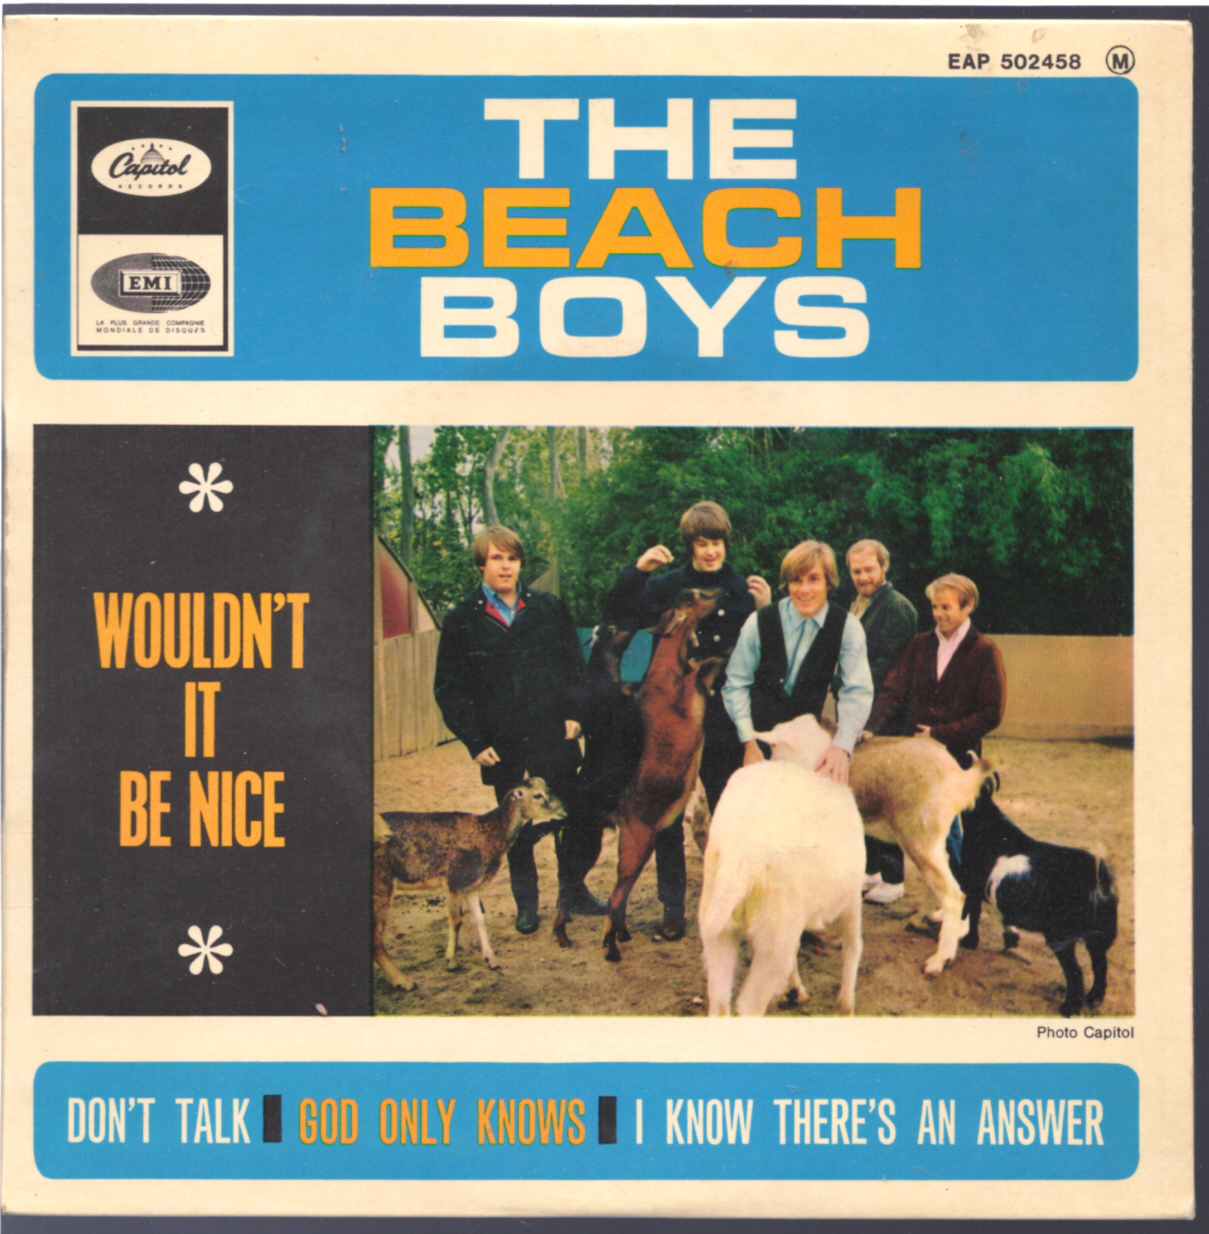 The flat was nice but the block. Beach boys Pet Sounds 1966. Wouldn't it be nice the Beach boys. The Beach boys фото. Beach boys "Pet Sounds".